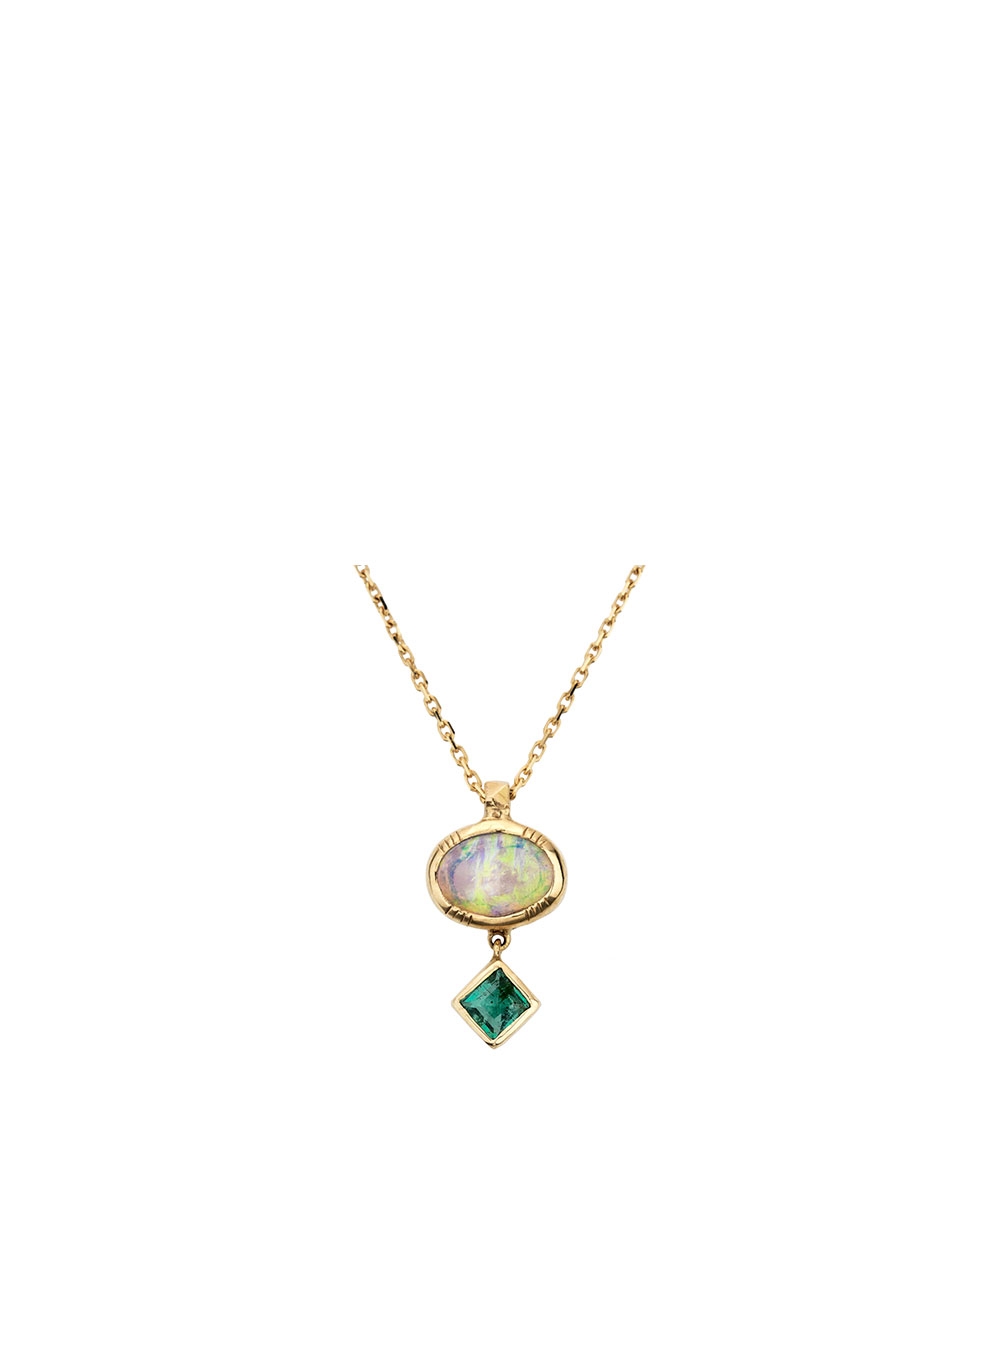 YELLOW GOLD EMERALD NECKLACE